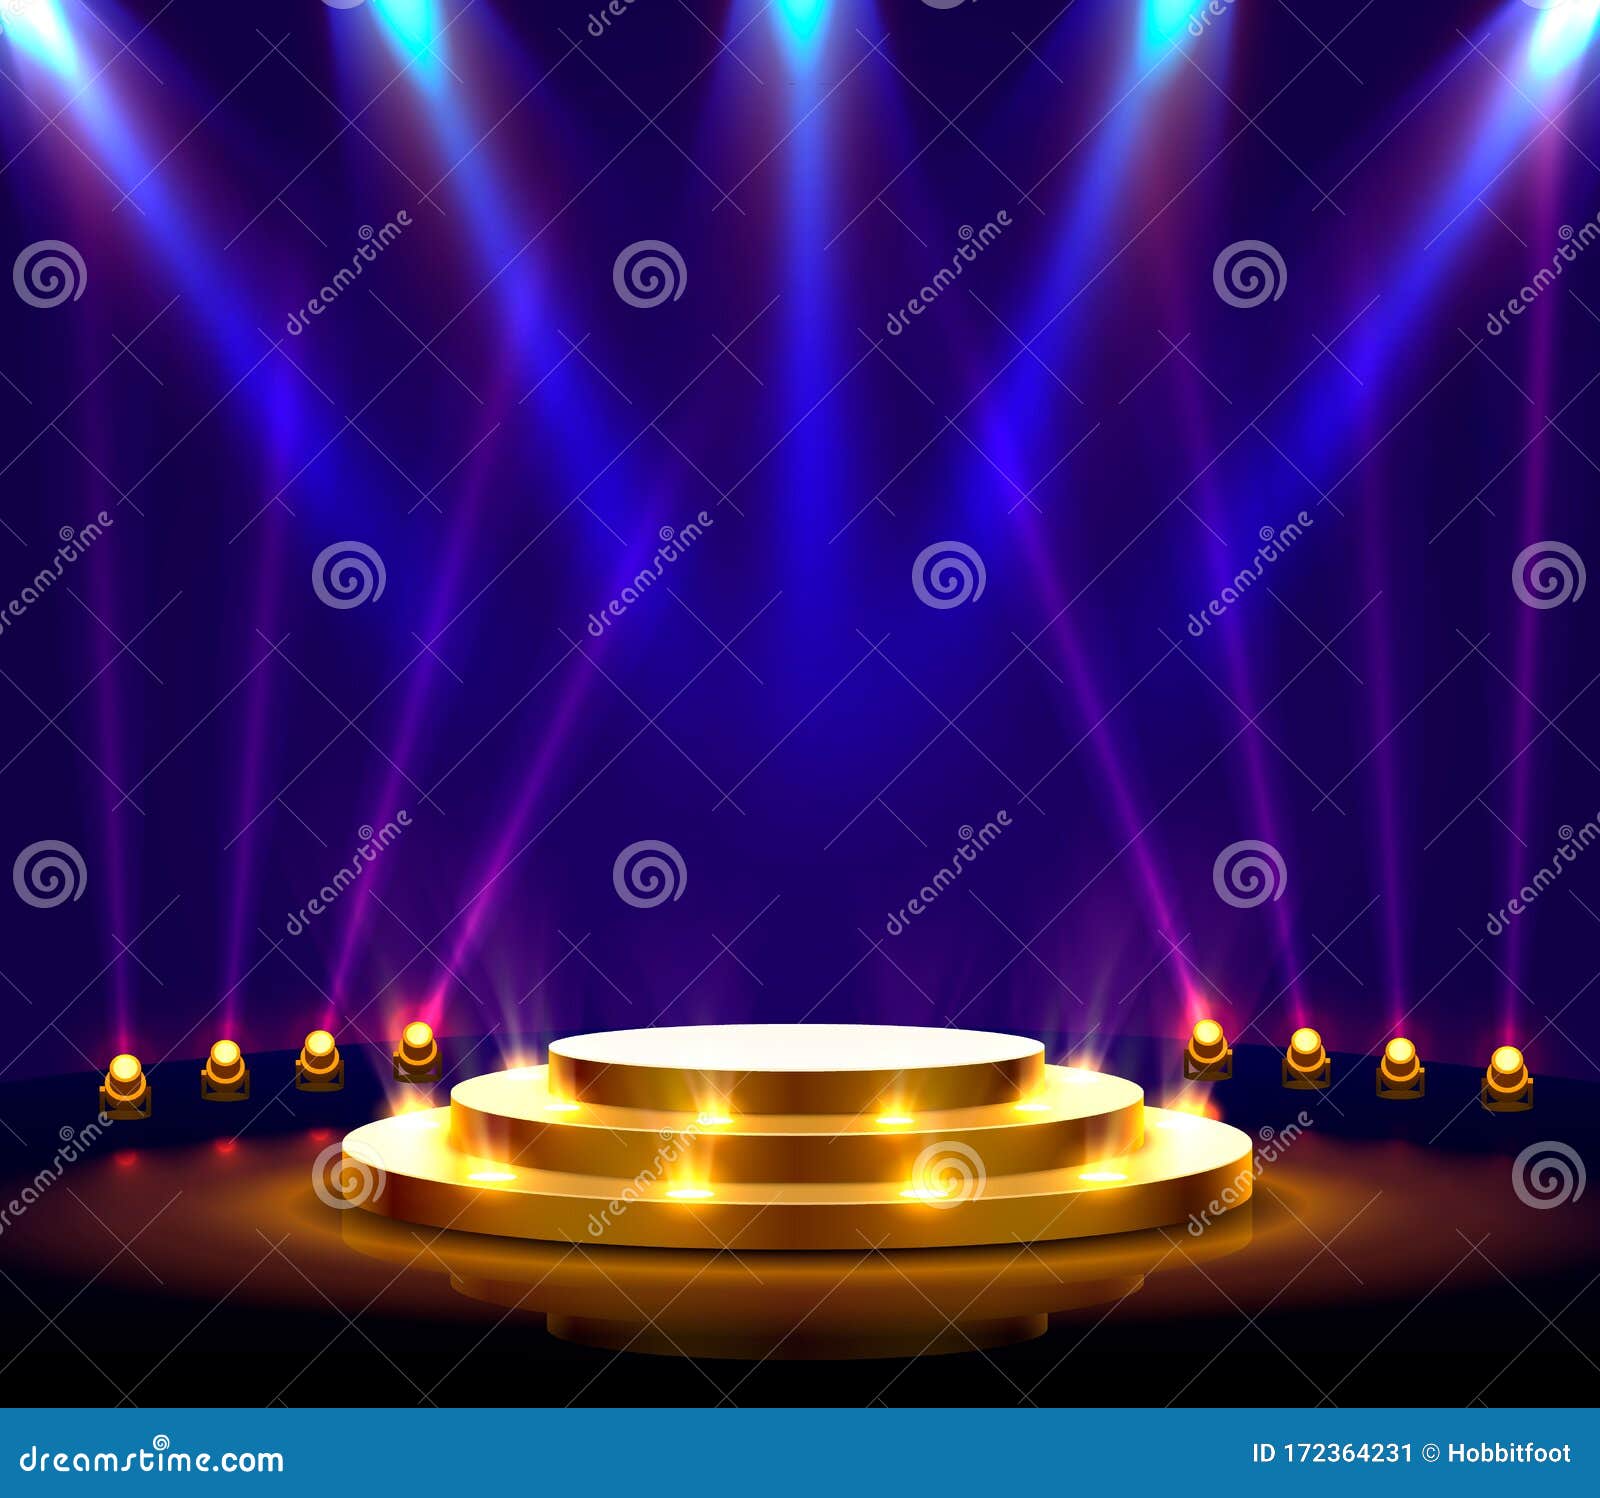 Stage Podium with Lighting, Stage Podium Scene with for Award Ceremony on Blue  Background. Stock Vector - Illustration of blue, party: 172364231